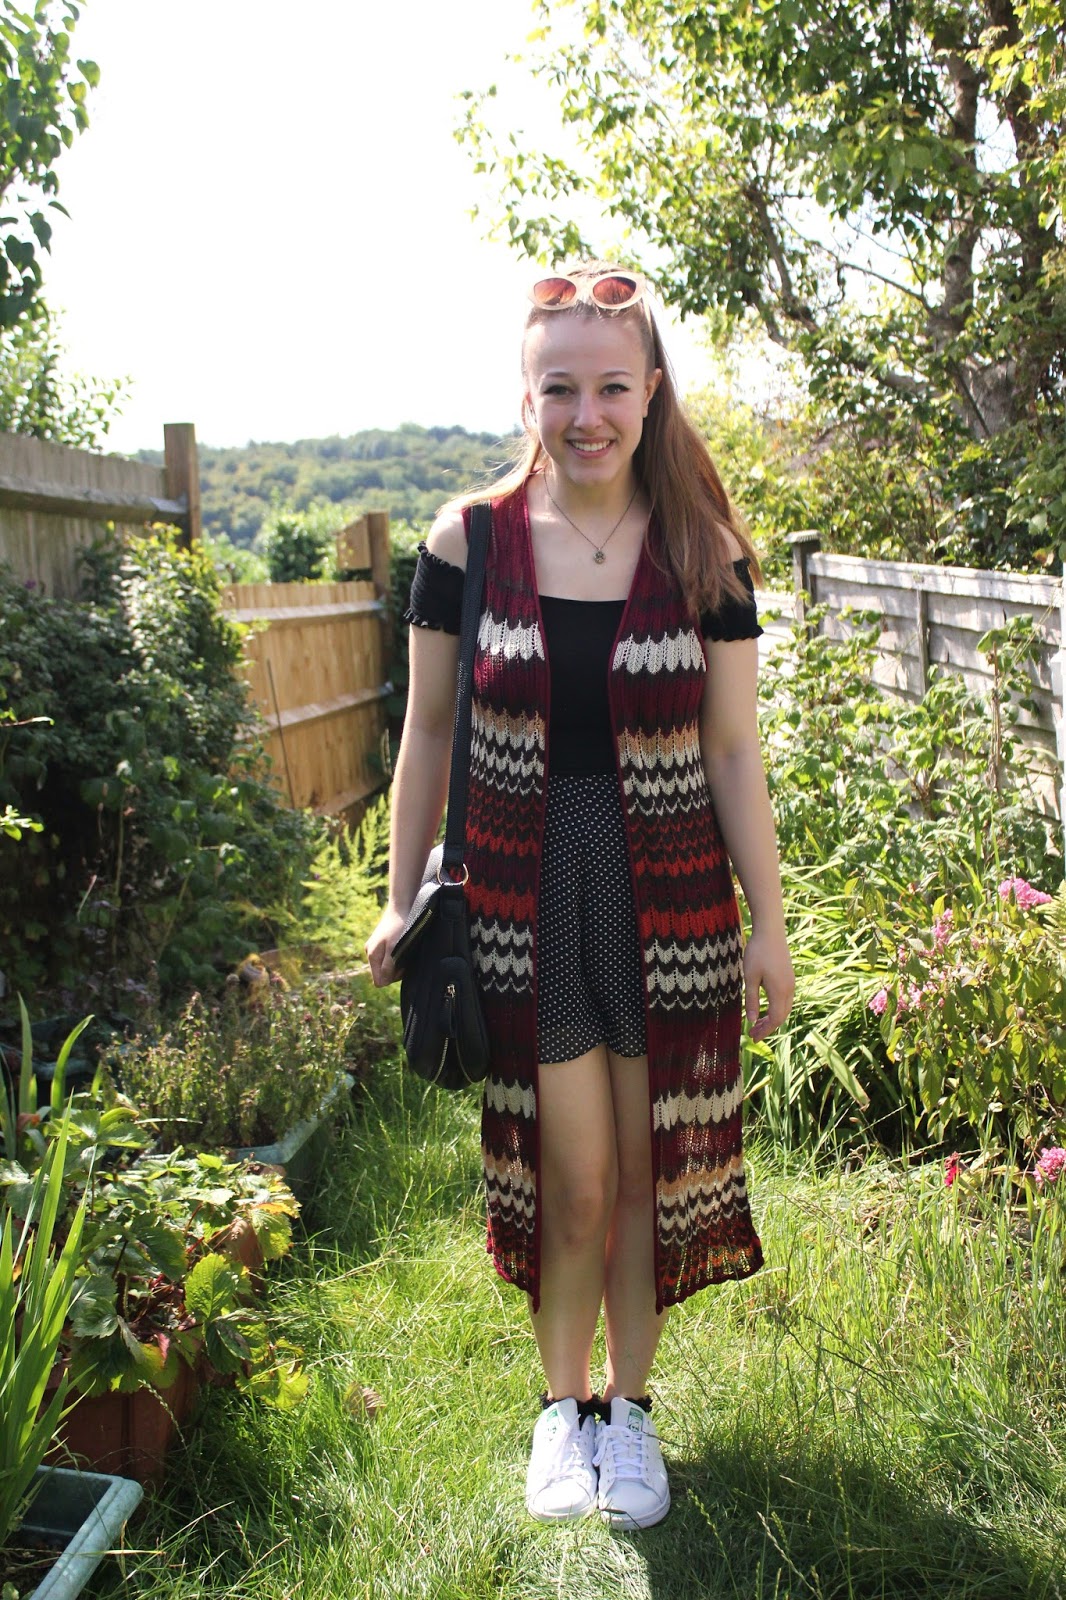 georgie-minter-brown-georgina-frequencies-fashion-blogger-ootd-outfit-clothes-new-look-sleeveless-cardigan-top-Morgan-shorts-Primark-Adidas-stan-smiths-pretty-little-thing-bag